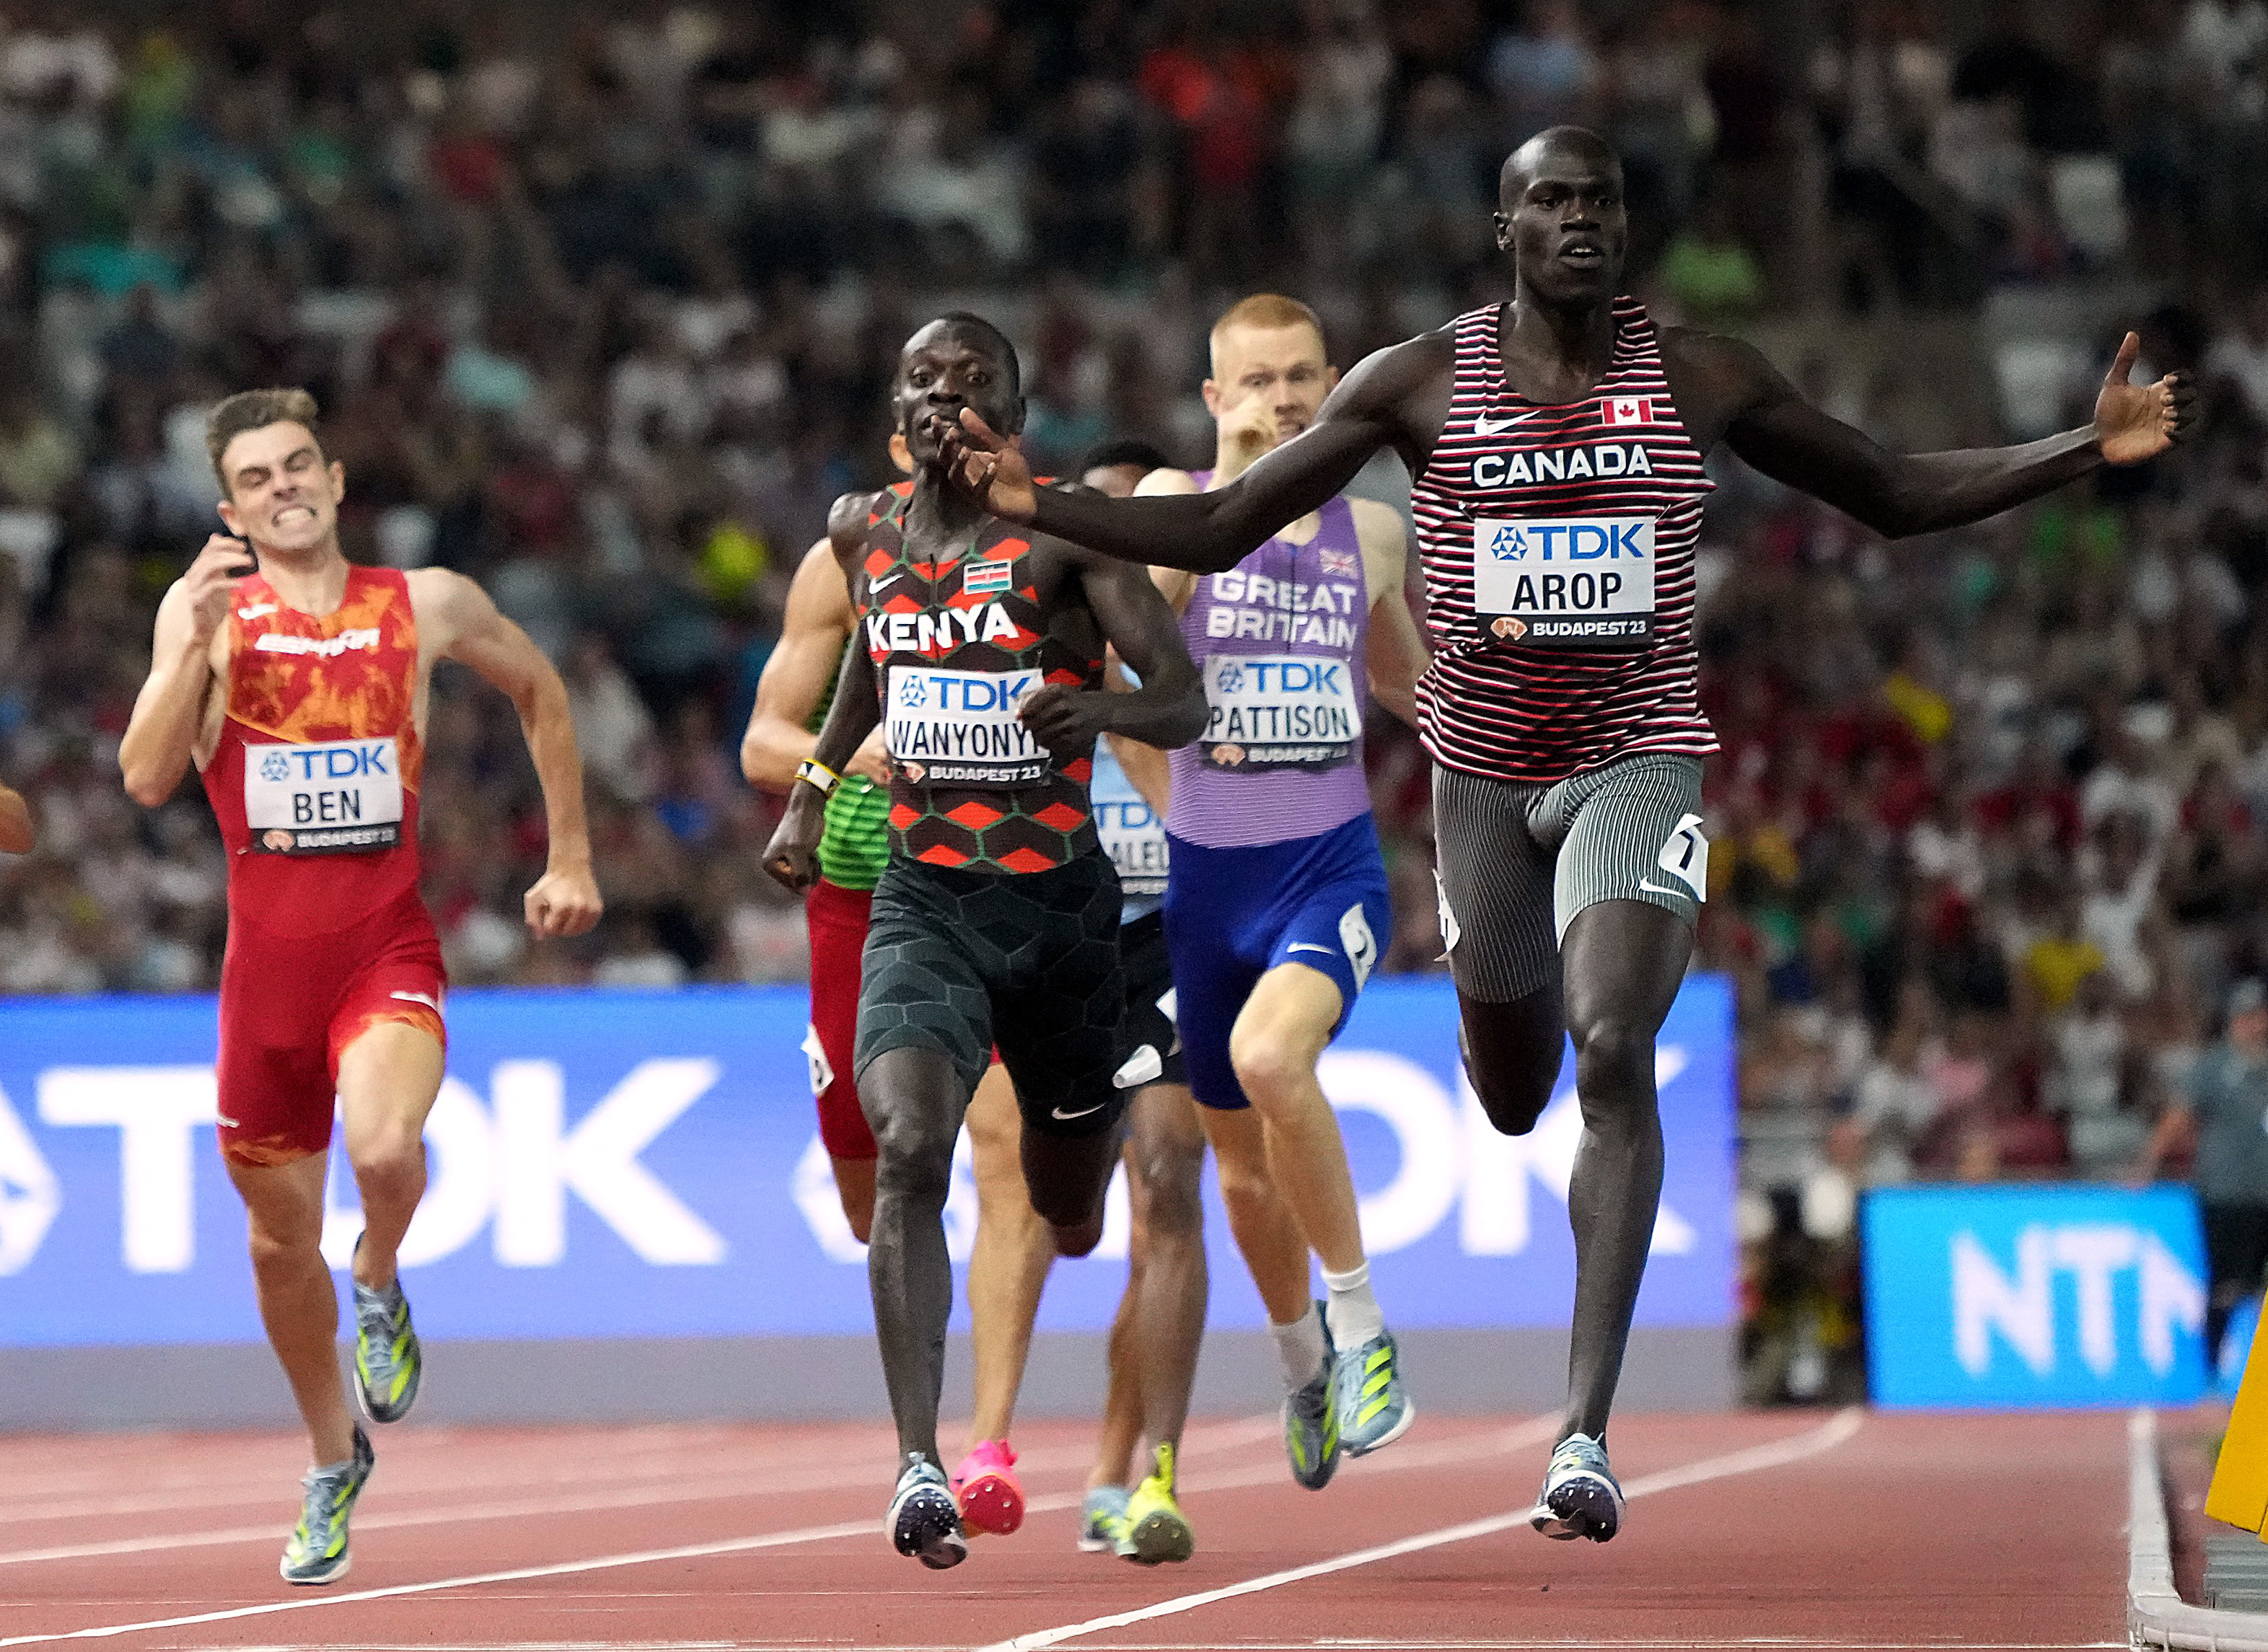 Canada's Arop goes from back to front to take 800m gold